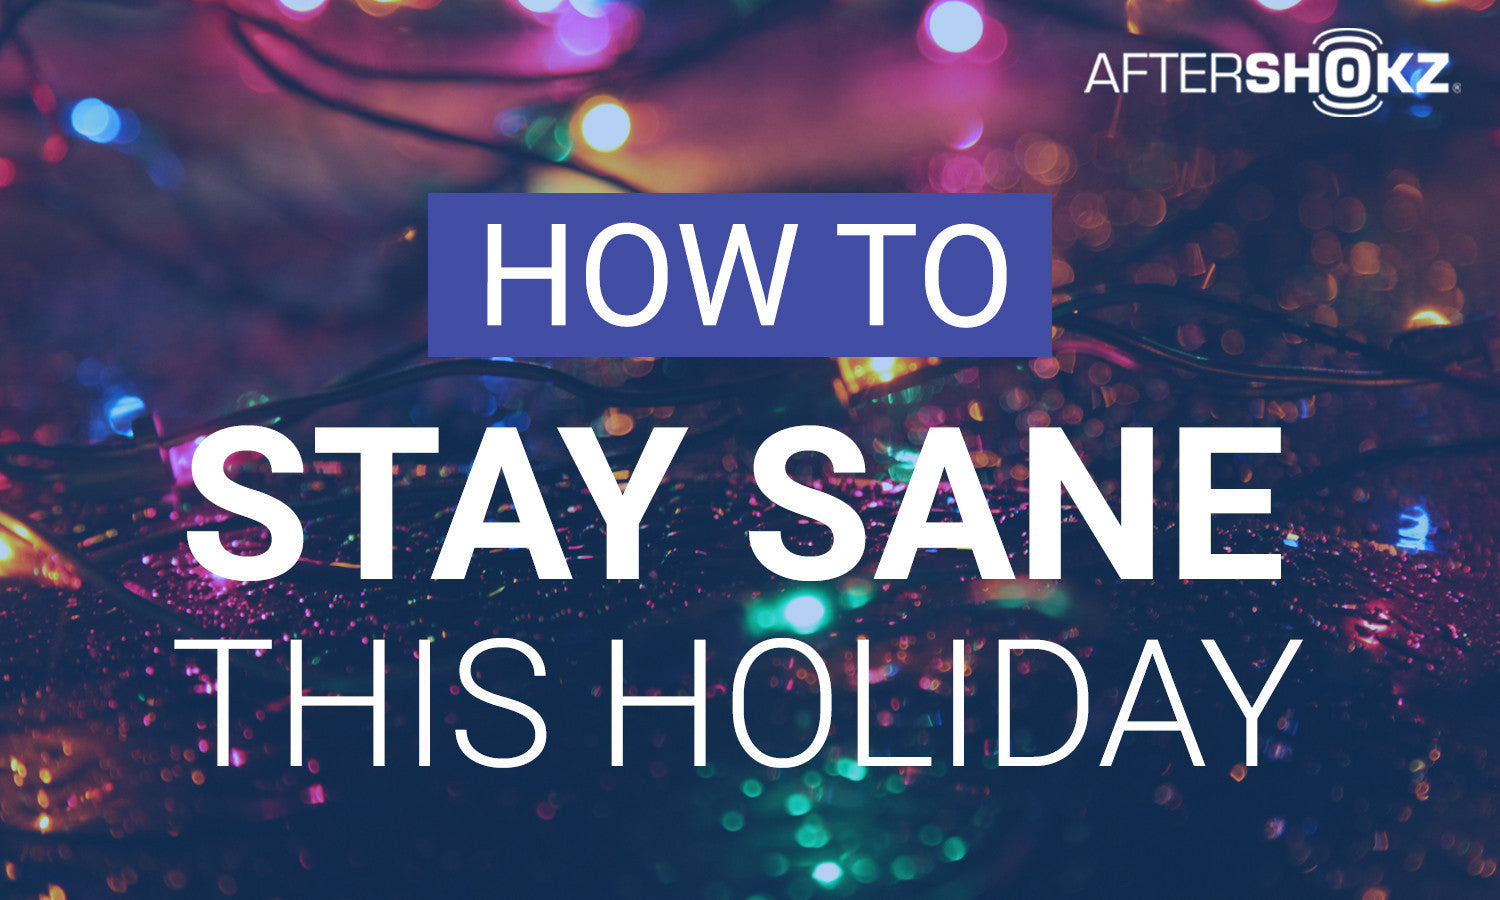 How to: Stay Sane This Holiday